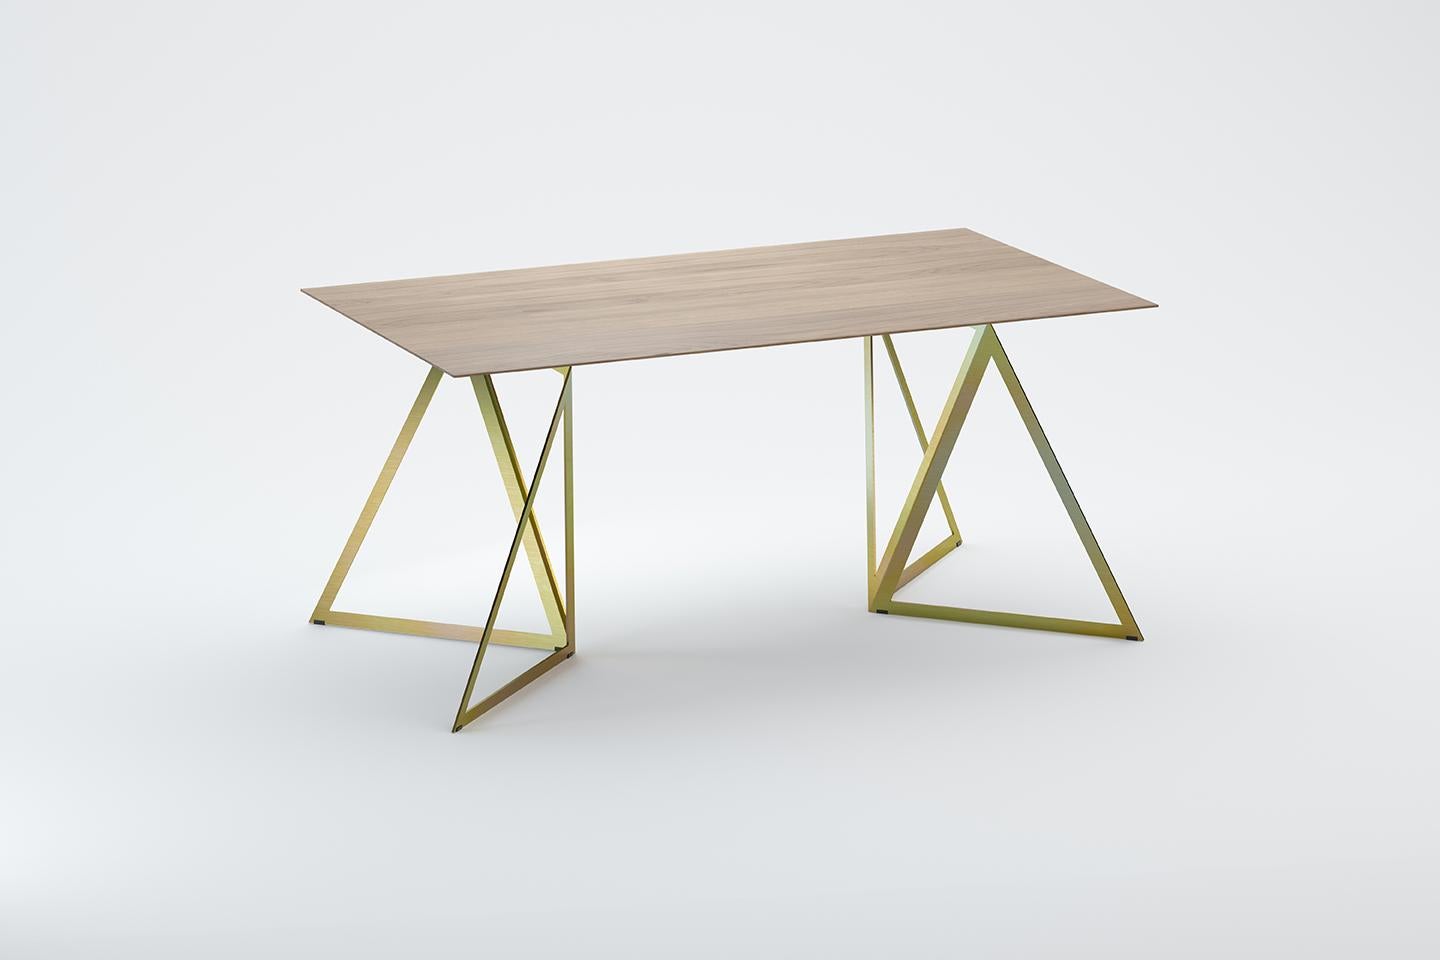 Steel stand table 160 oak by Sebastian Scherer
Dimensions: D 160 x W 90 x H 74 cm
Materials: Oak, steel, wood
Also available: Colours: Solid wood (matt lacquered or oiled): black and white stained ash / natural oak / american walnut
Steel